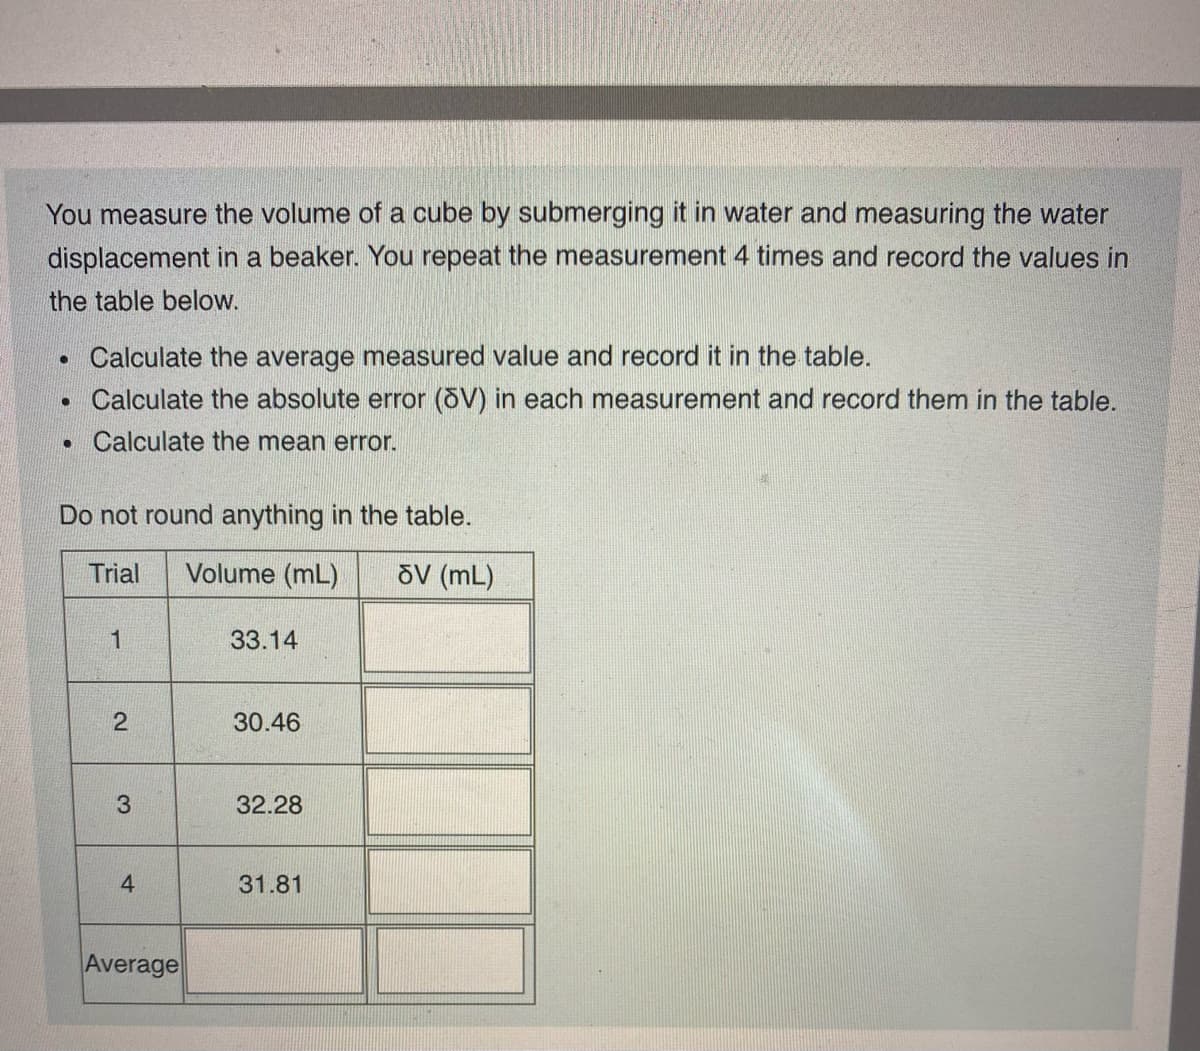 You measure the volume of a cube by submerging it in water and measuring the water
displacement in a beaker. You repeat the measurement 4 times and record the values in
the table below.
Calculate the average measured value and record it in the table.
• Calculate the absolute error (öV) in each measurement and record them in the table.
Calculate the mean error.
Do not round anything in the table.
Trial
Volume (mL)
õV (mL)
1
33.14
30.46
3
32.28
4.
31.81
Average
